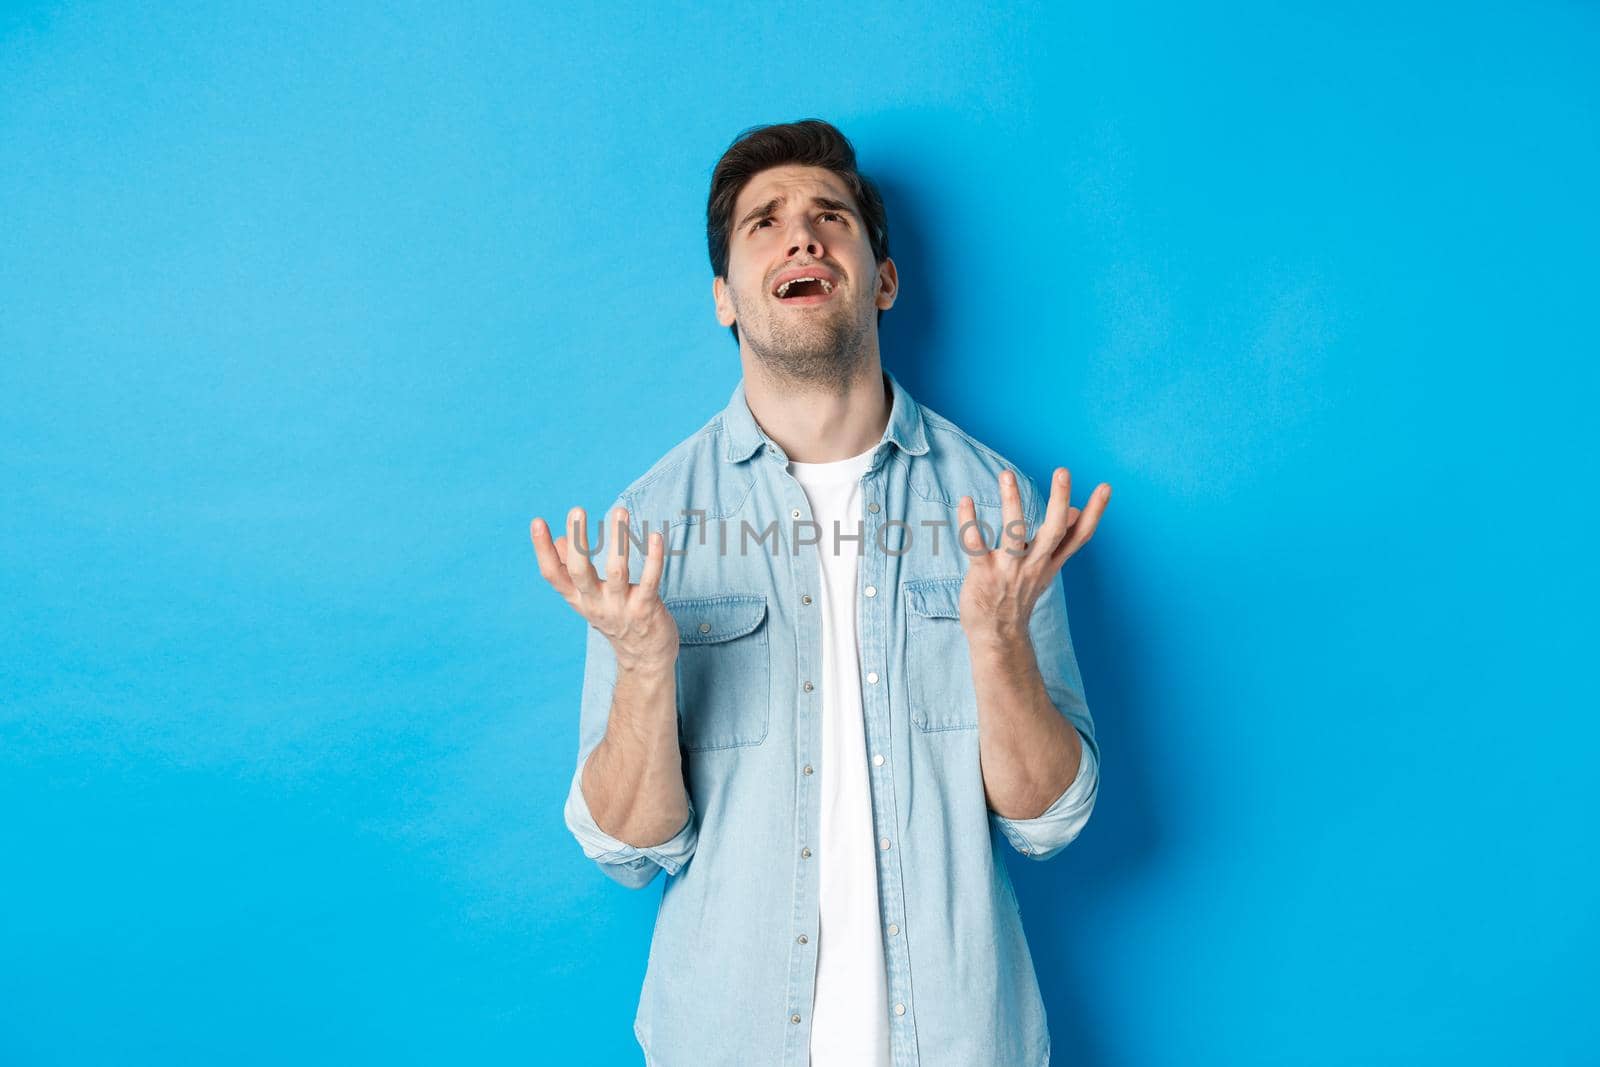 Frustrated guy complaining to god, looking up and pleading, standing against blue background upset.